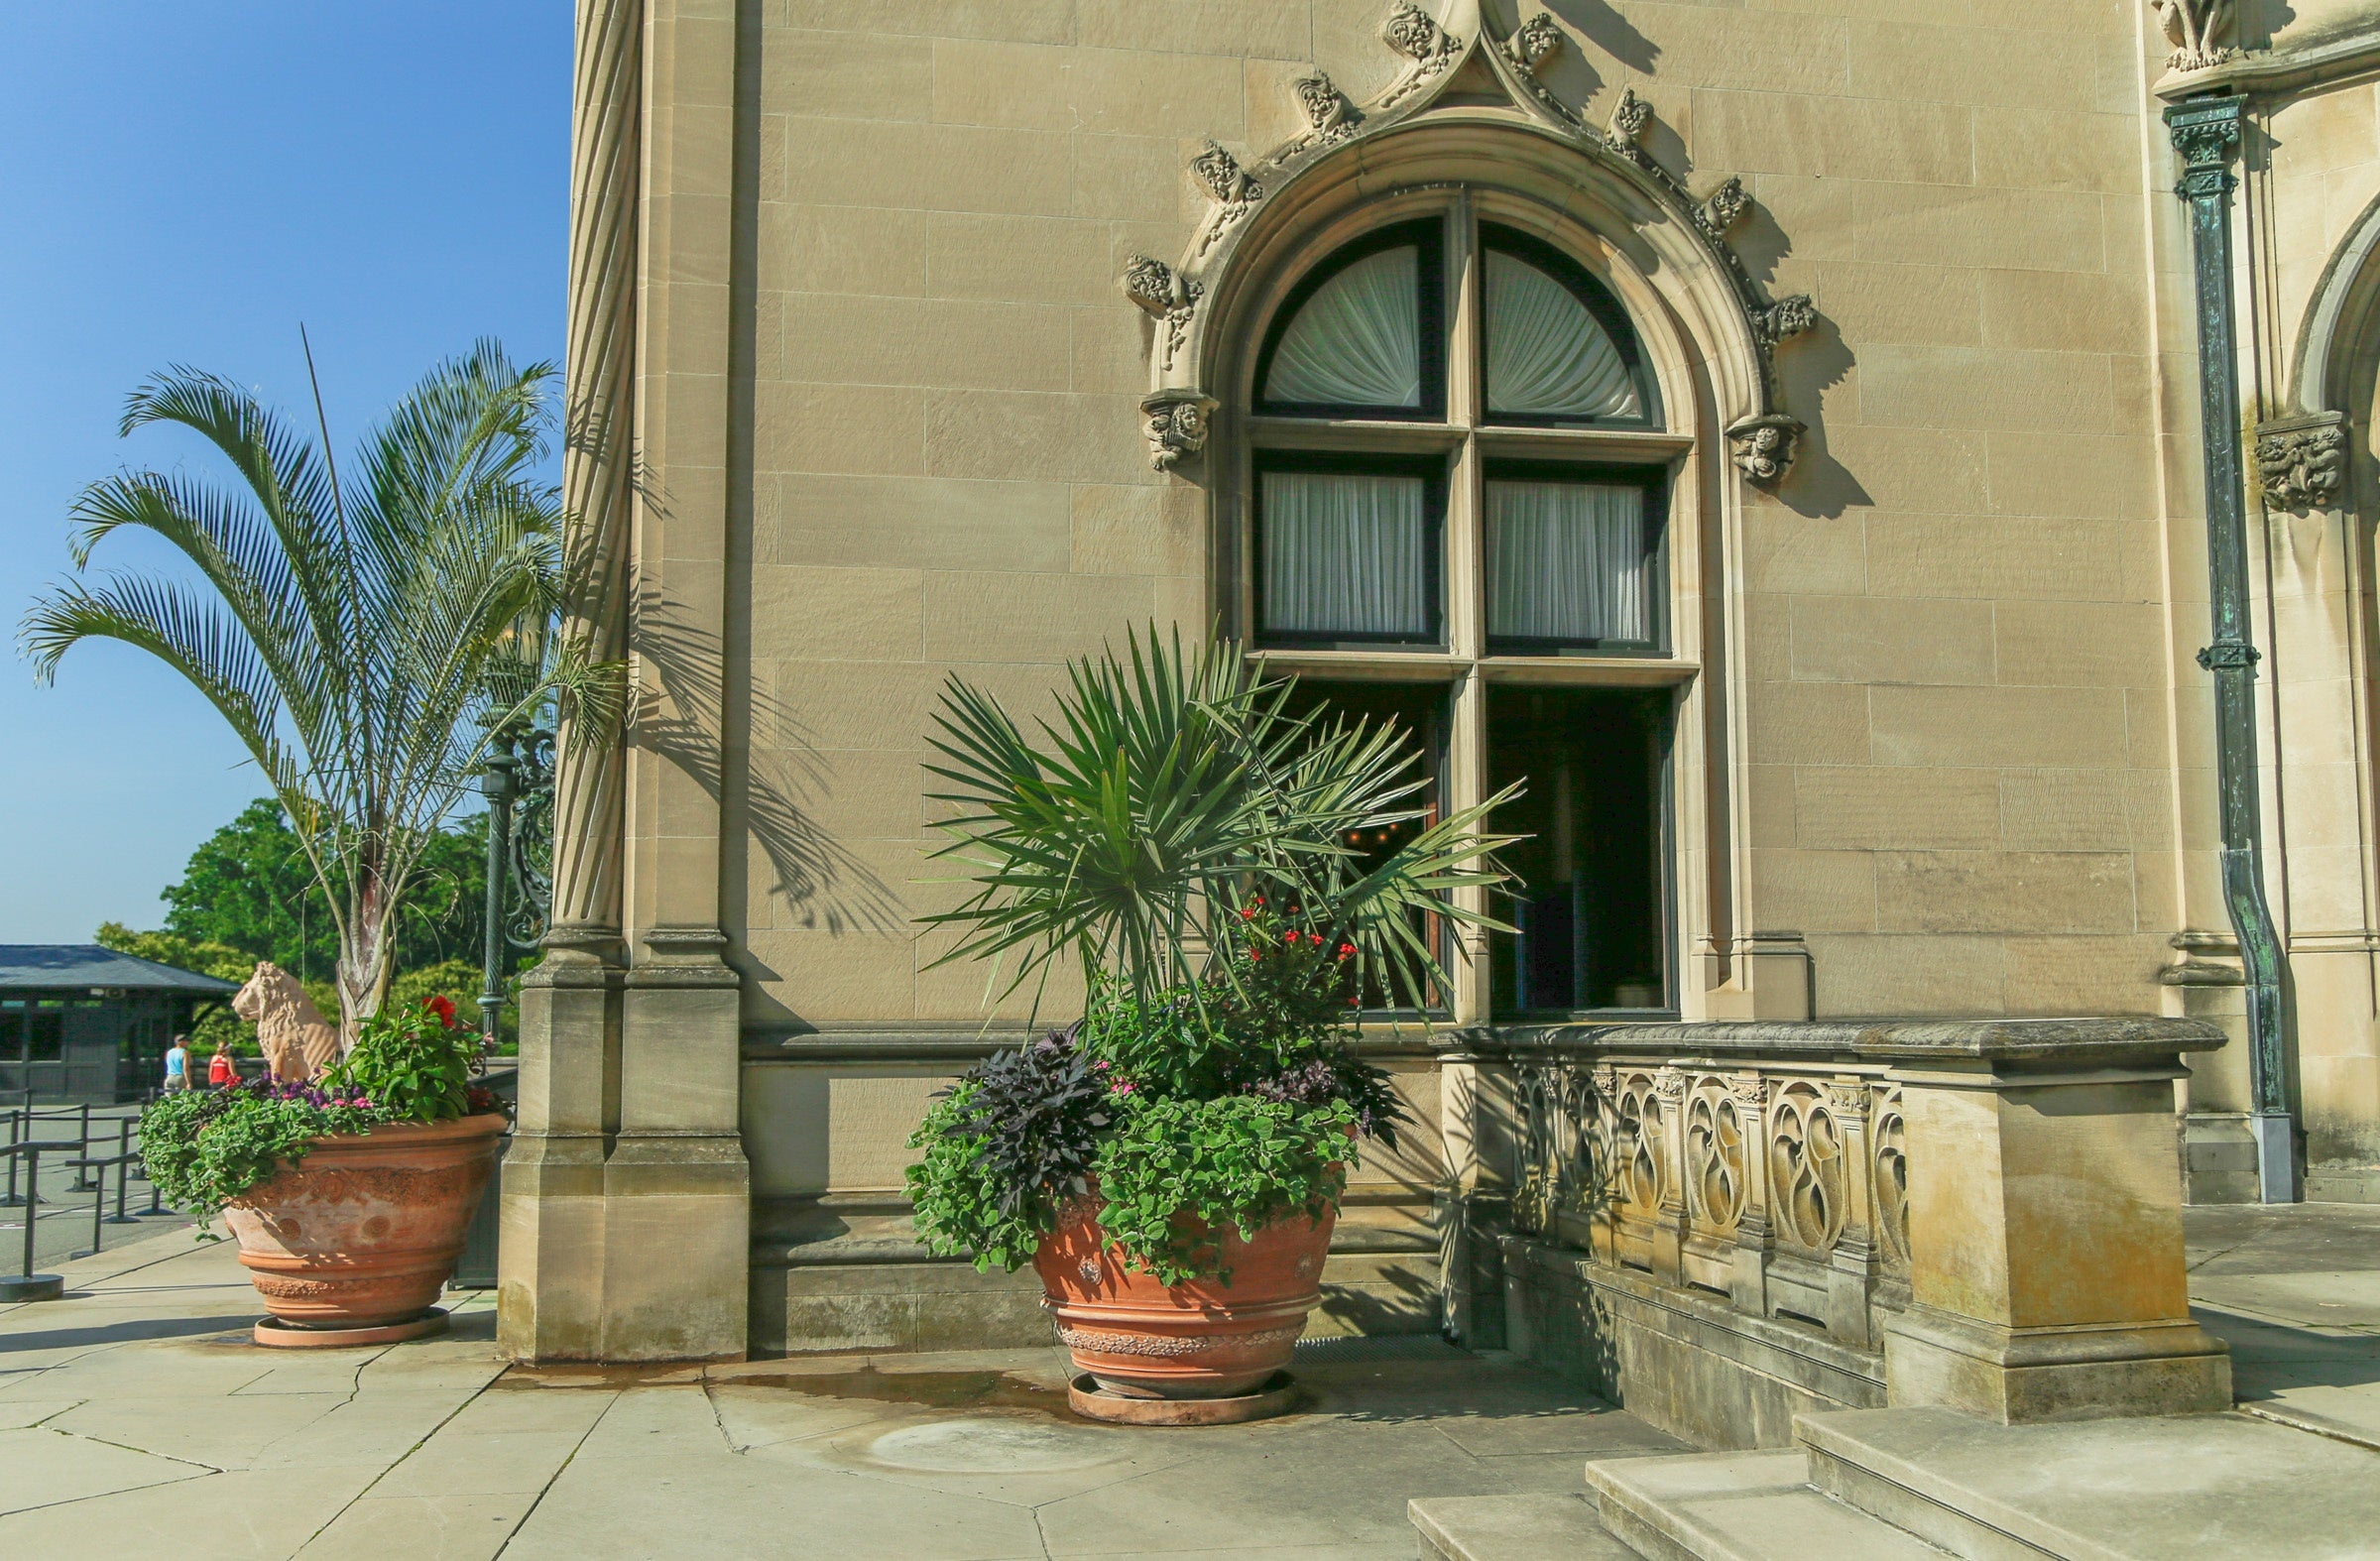 Photos of large potted plants in front of Biltmore